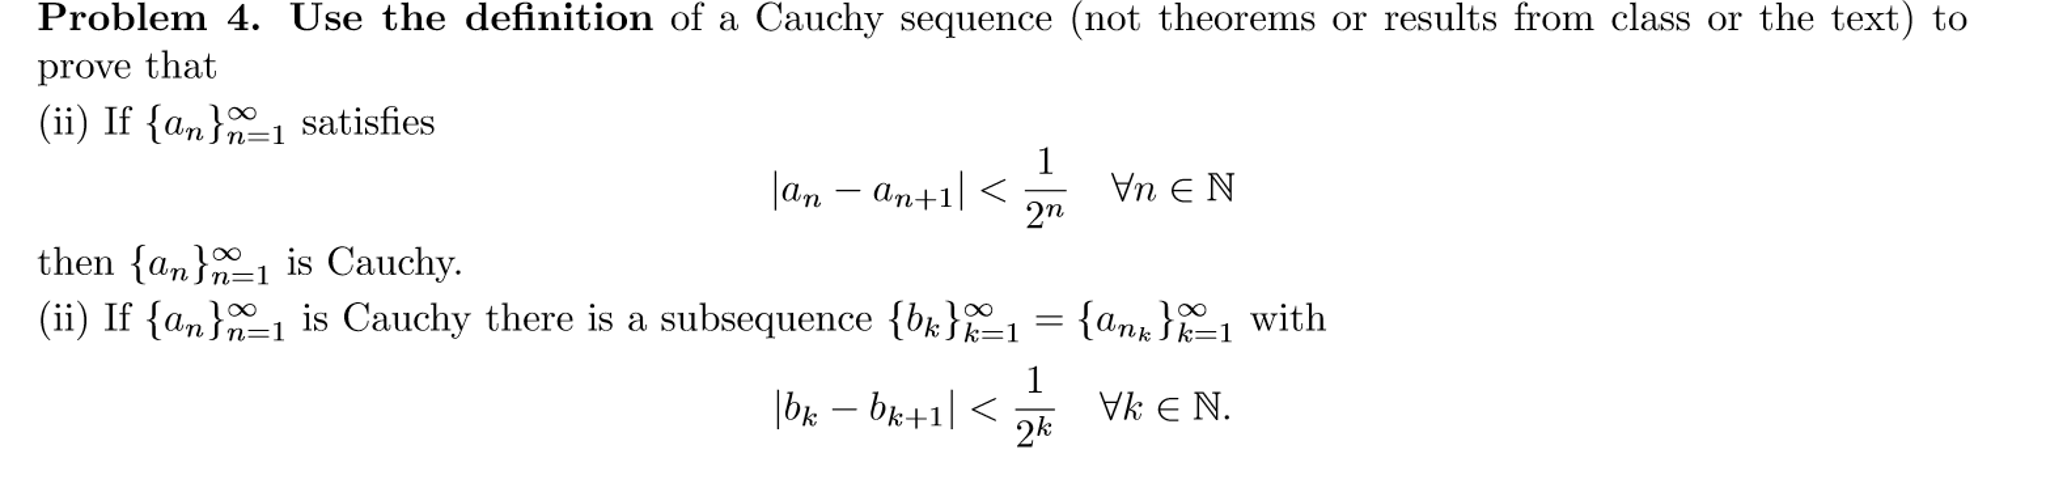 cauchy sequence of metric space